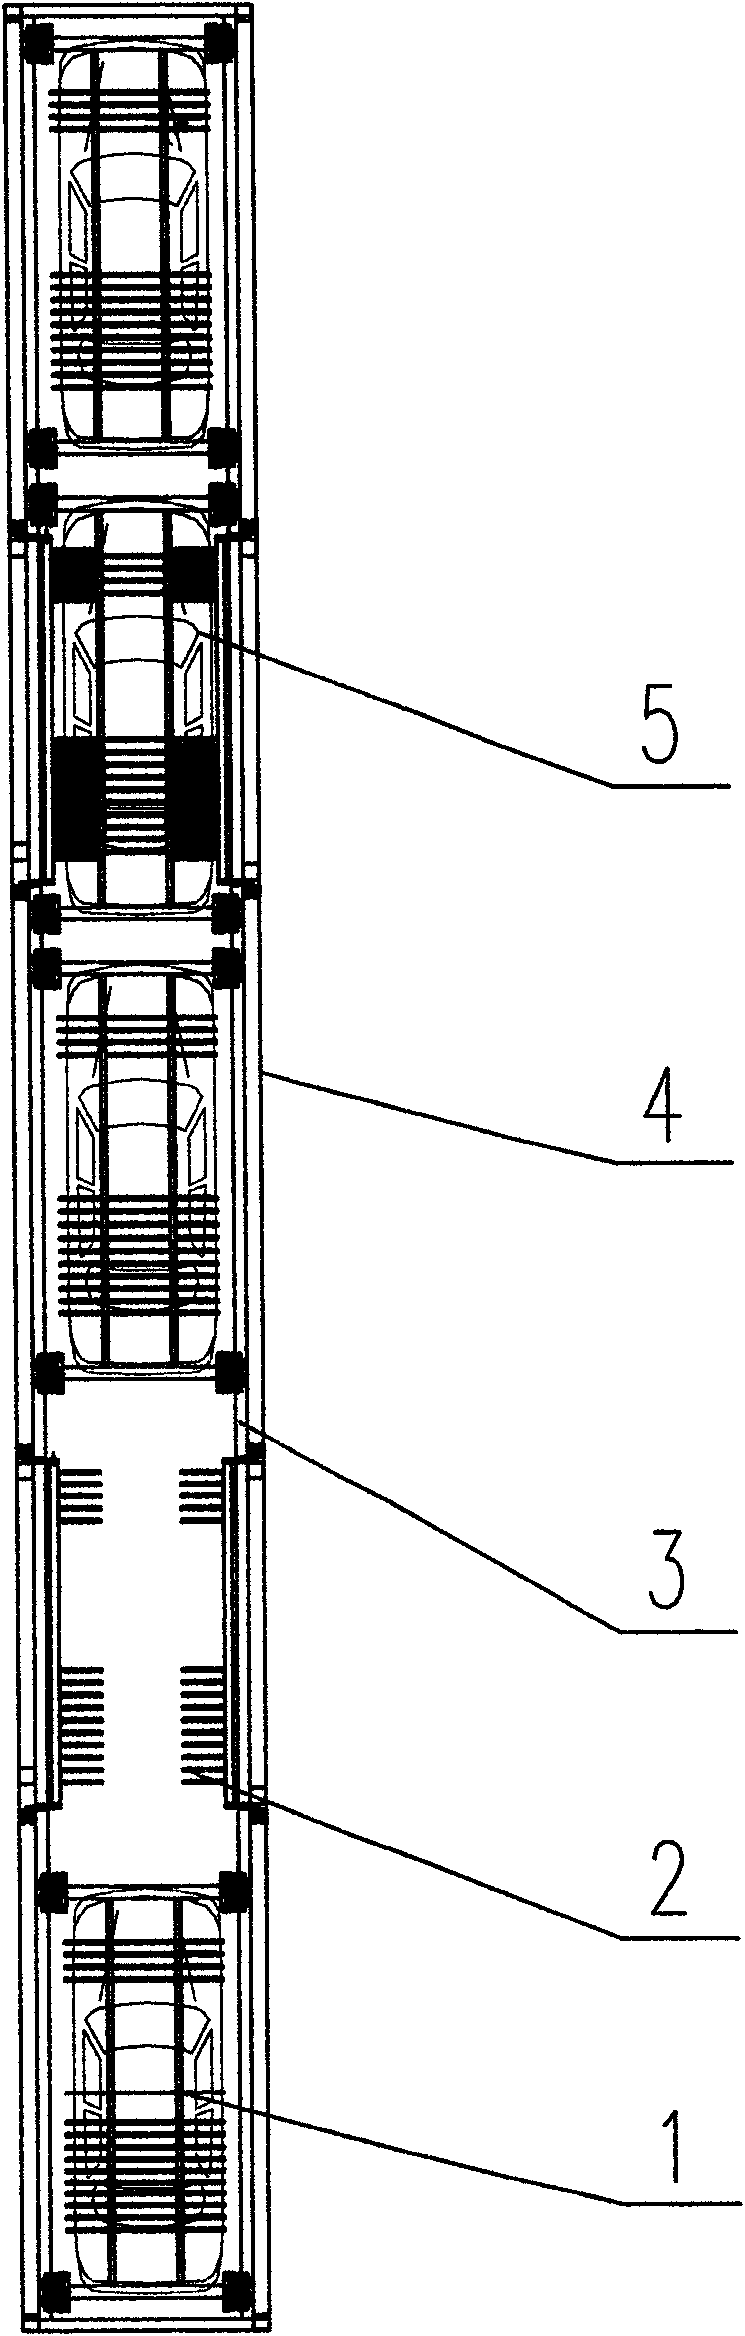 Longitudinal connected comb-tooth-type vertical lifting parking equipment